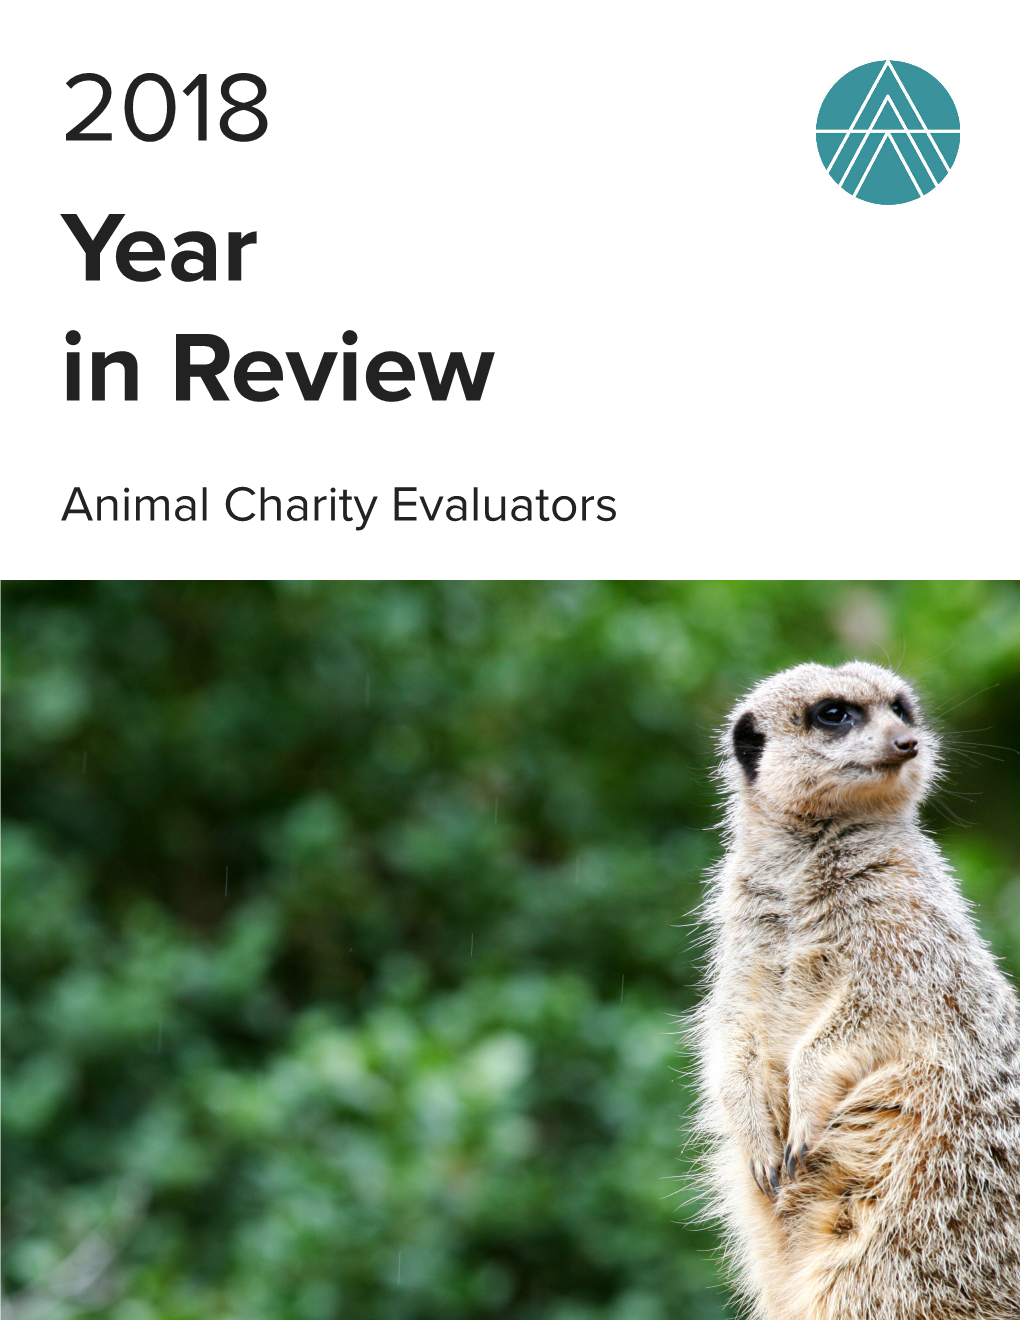 2018 Year in Review Animal Charity Evaluators 00 Contents